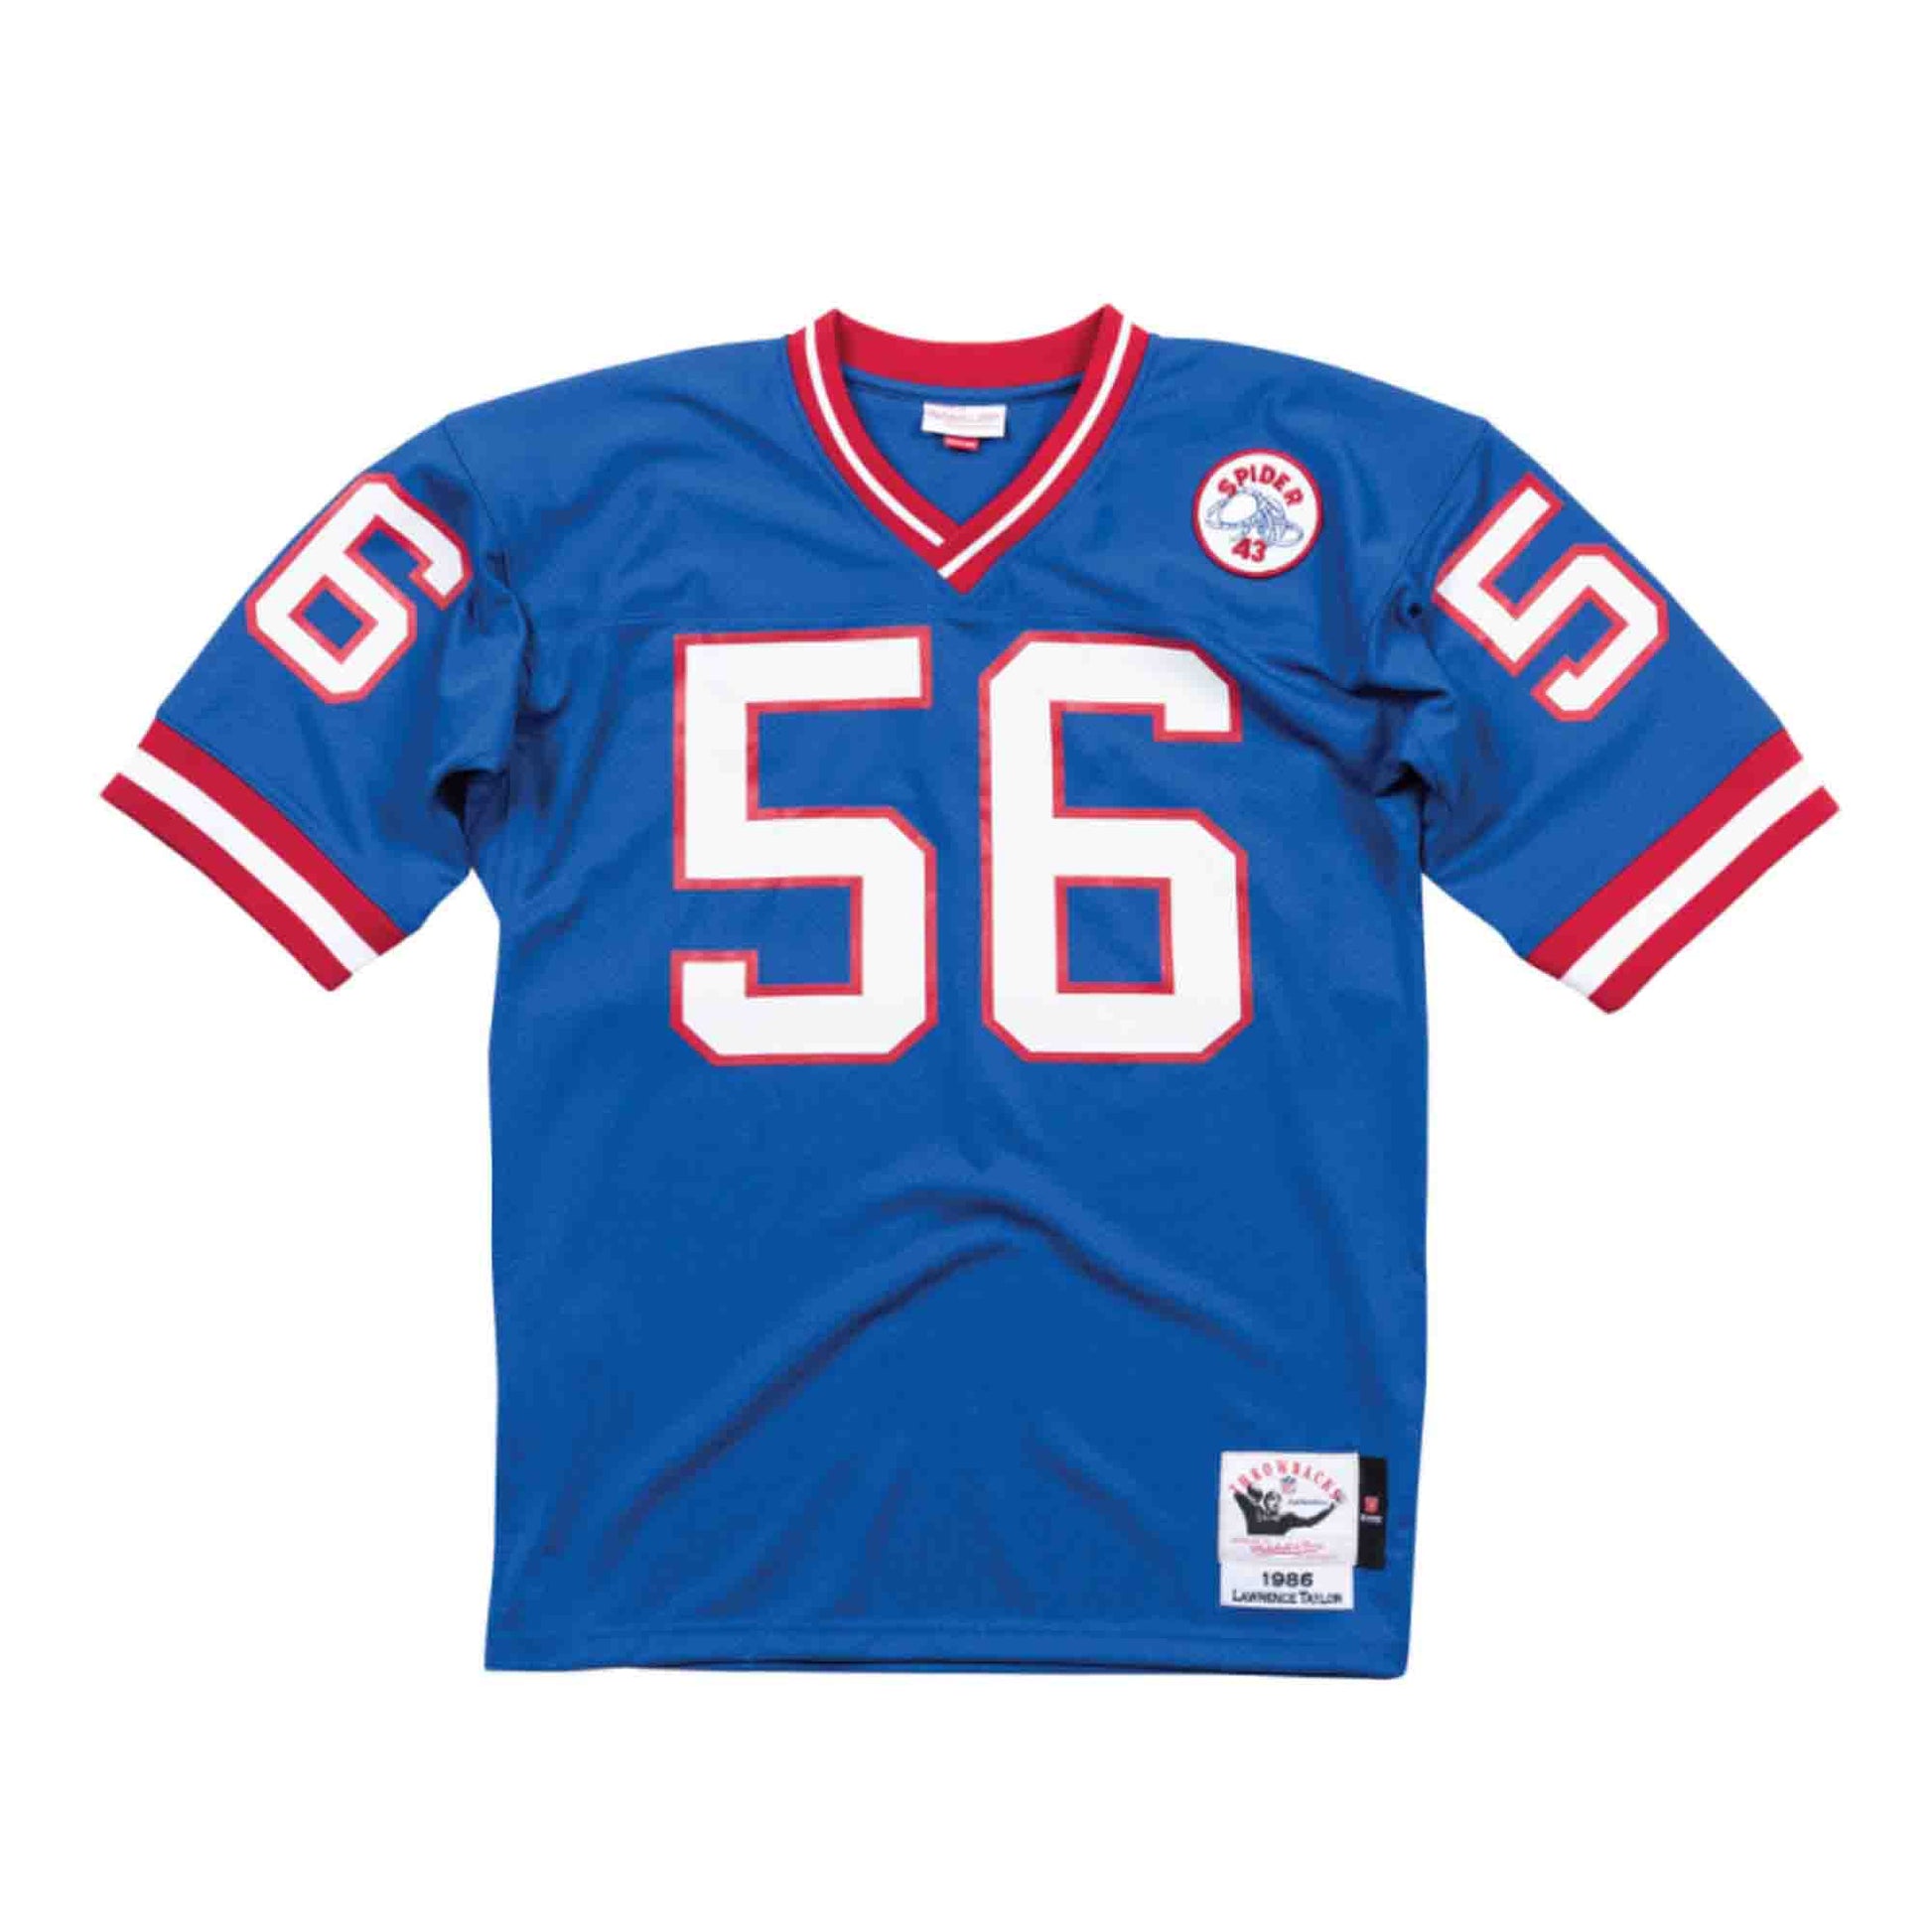 New York Giants football jersey men size L #56 Lawrence Taylor